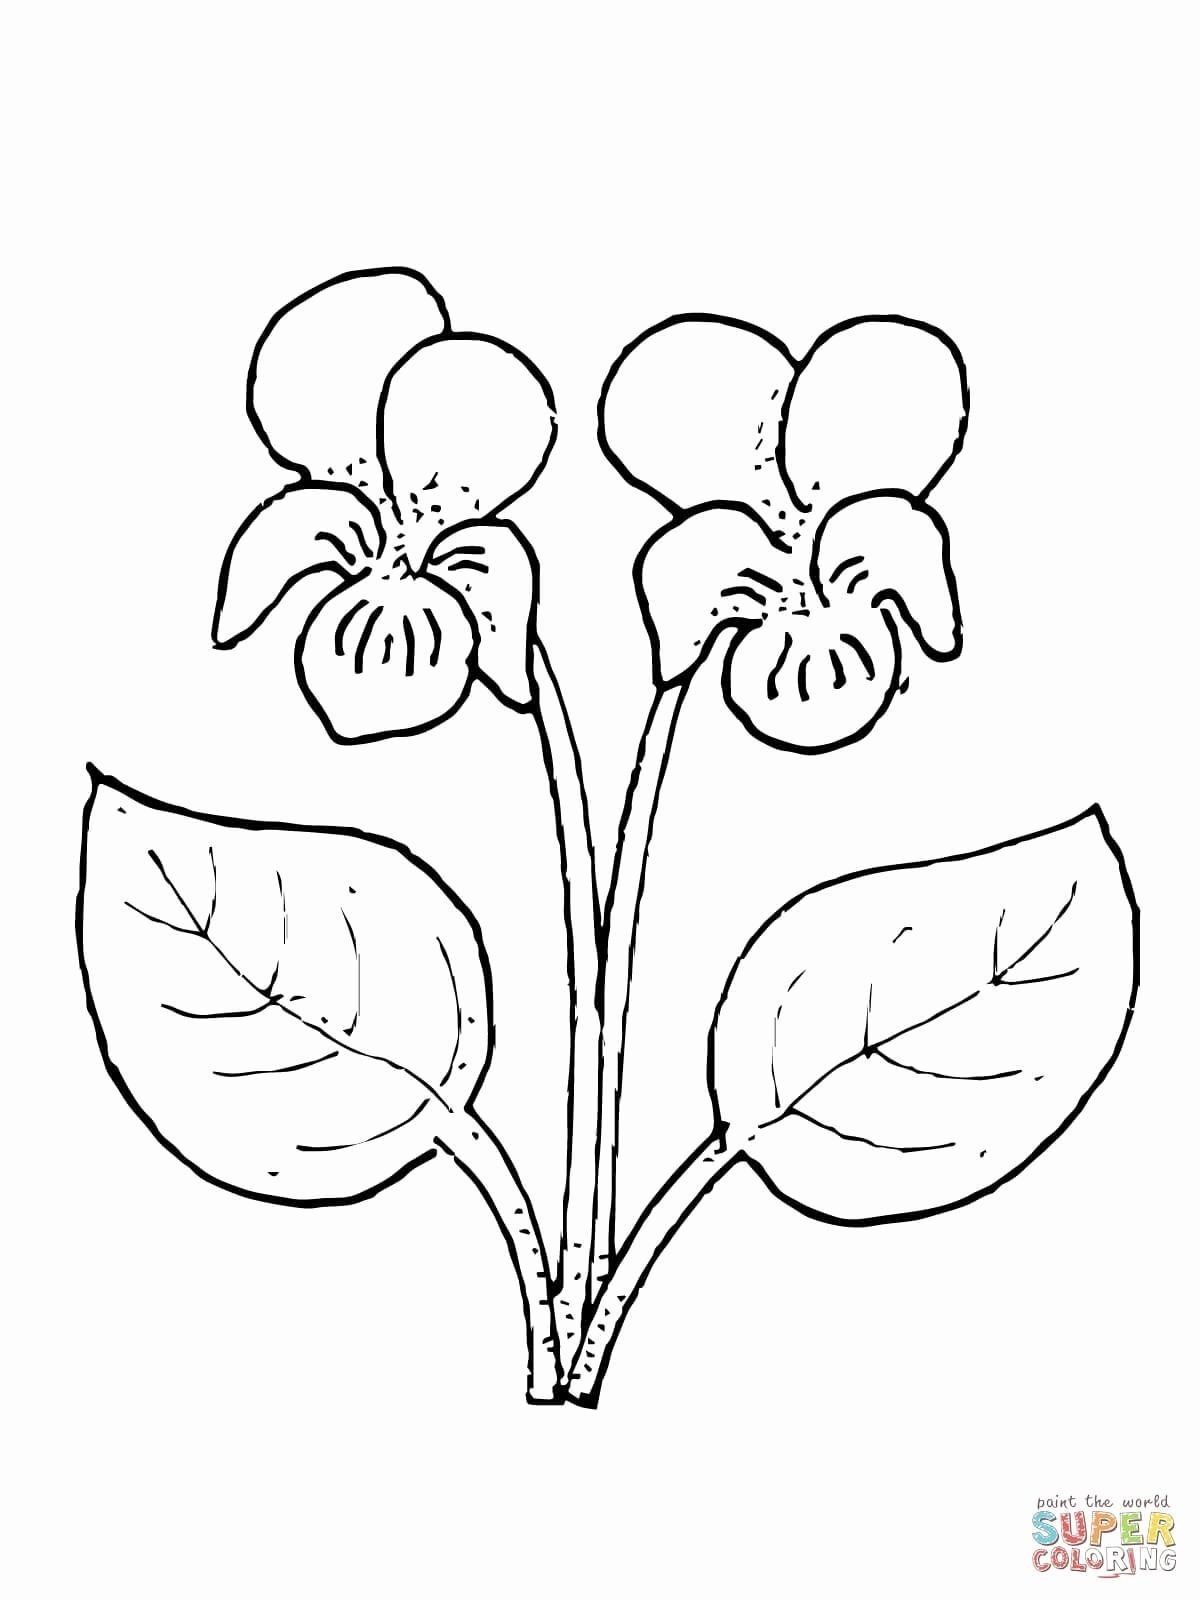 11 Awesome Royal Copenhagen Vase 2024 free download royal copenhagen vase of cheap vases for sale beautiful coloring pages awesome cool vases with regard to cheap vases for sale beautiful coloring pages awesome cool vases flower vase coloring